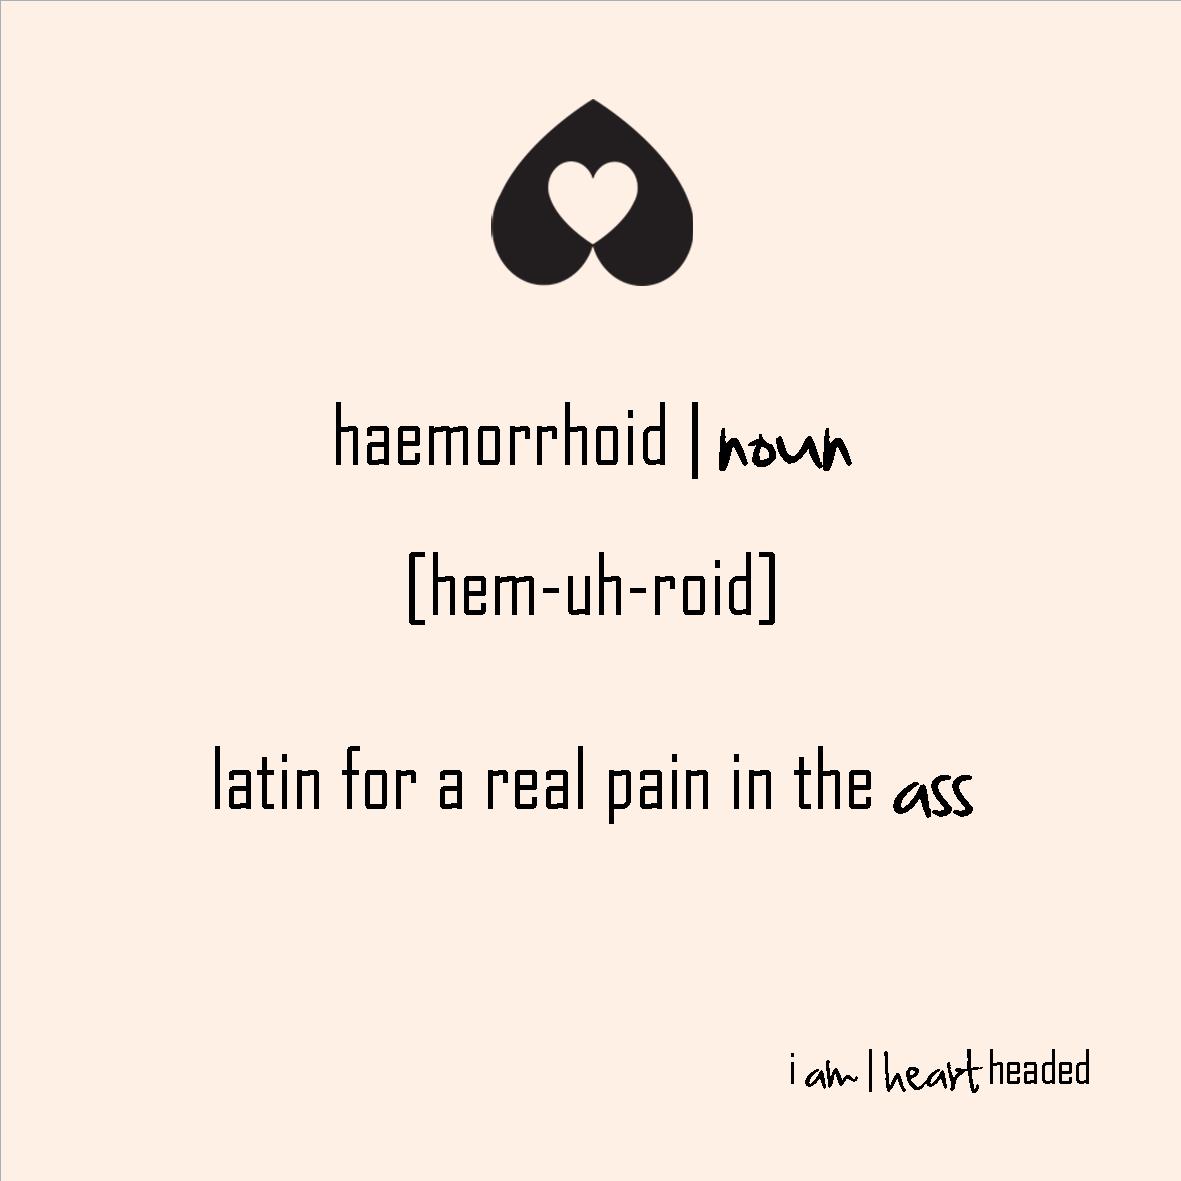 full-size featured image of quote 'pain in the ass' in category 'irony' at i am | heart headed